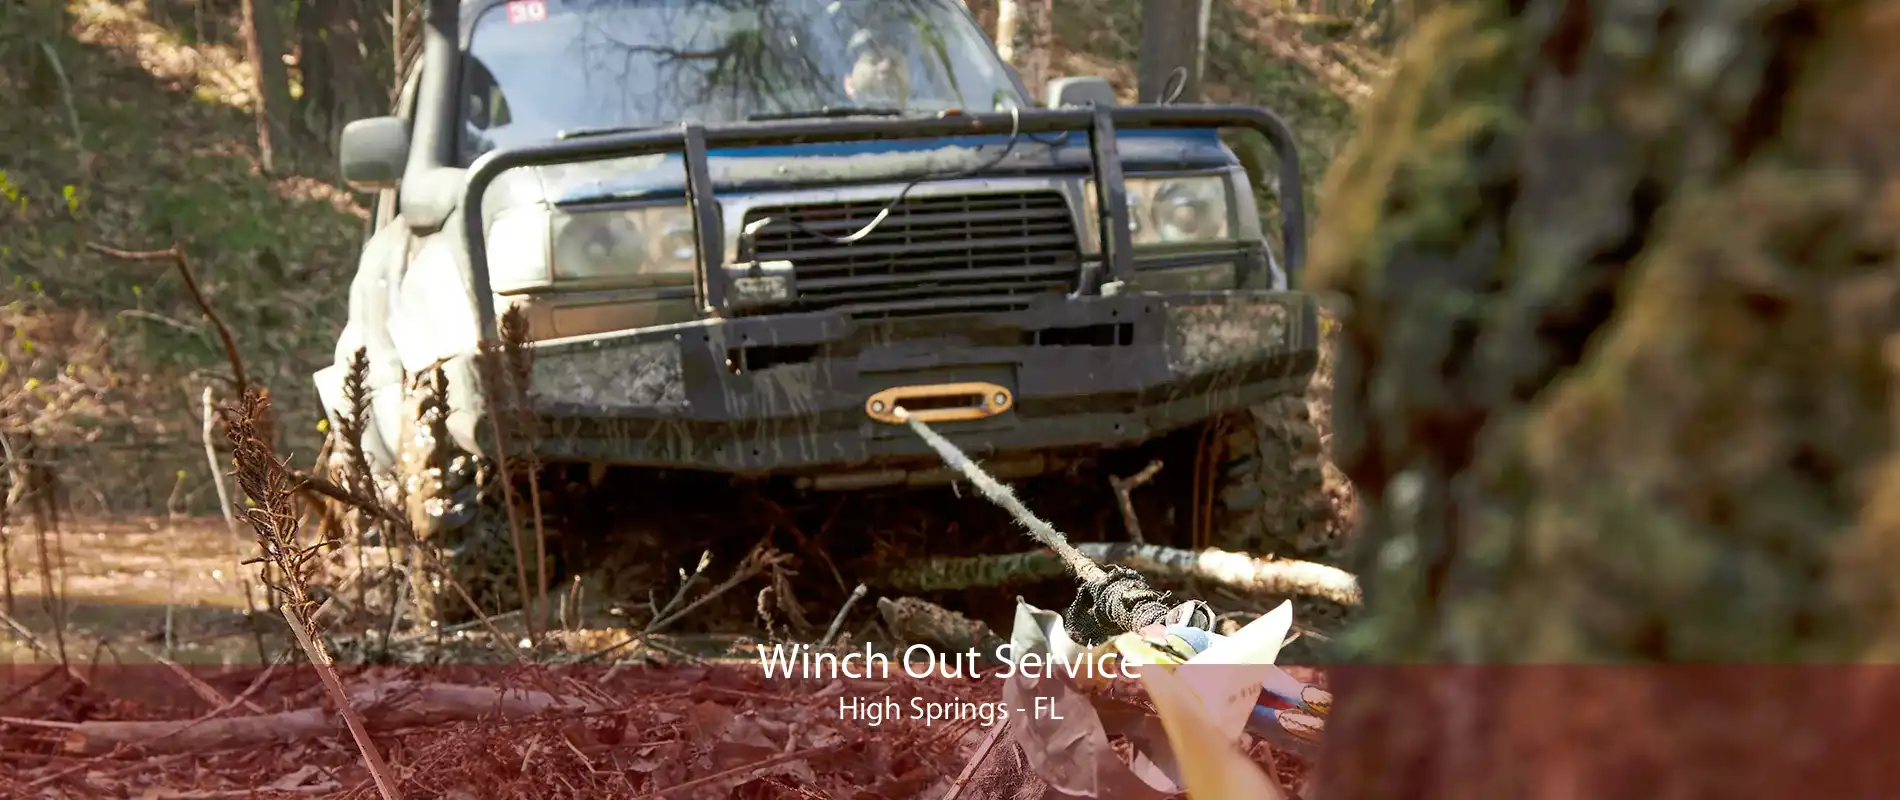 Winch Out Service High Springs - FL